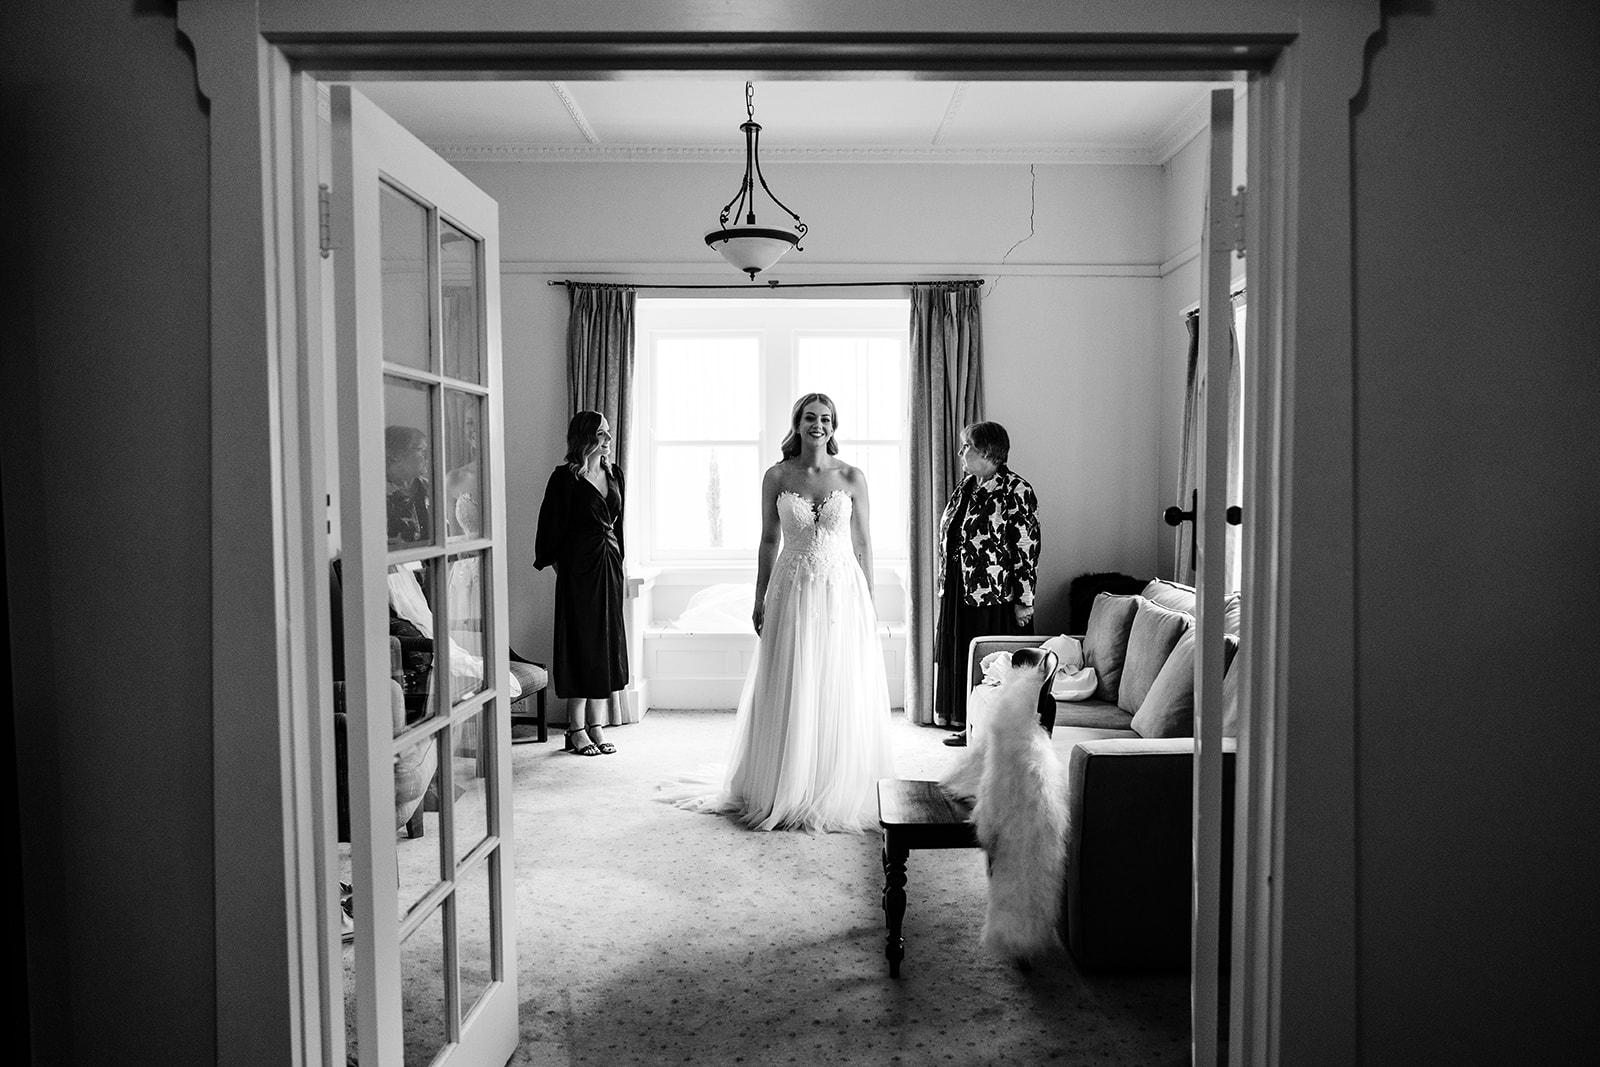 wedding day getting ready photos at Brown Brothers bridal cottage. Bride wearing Stella York gown with gorgeous sleeves